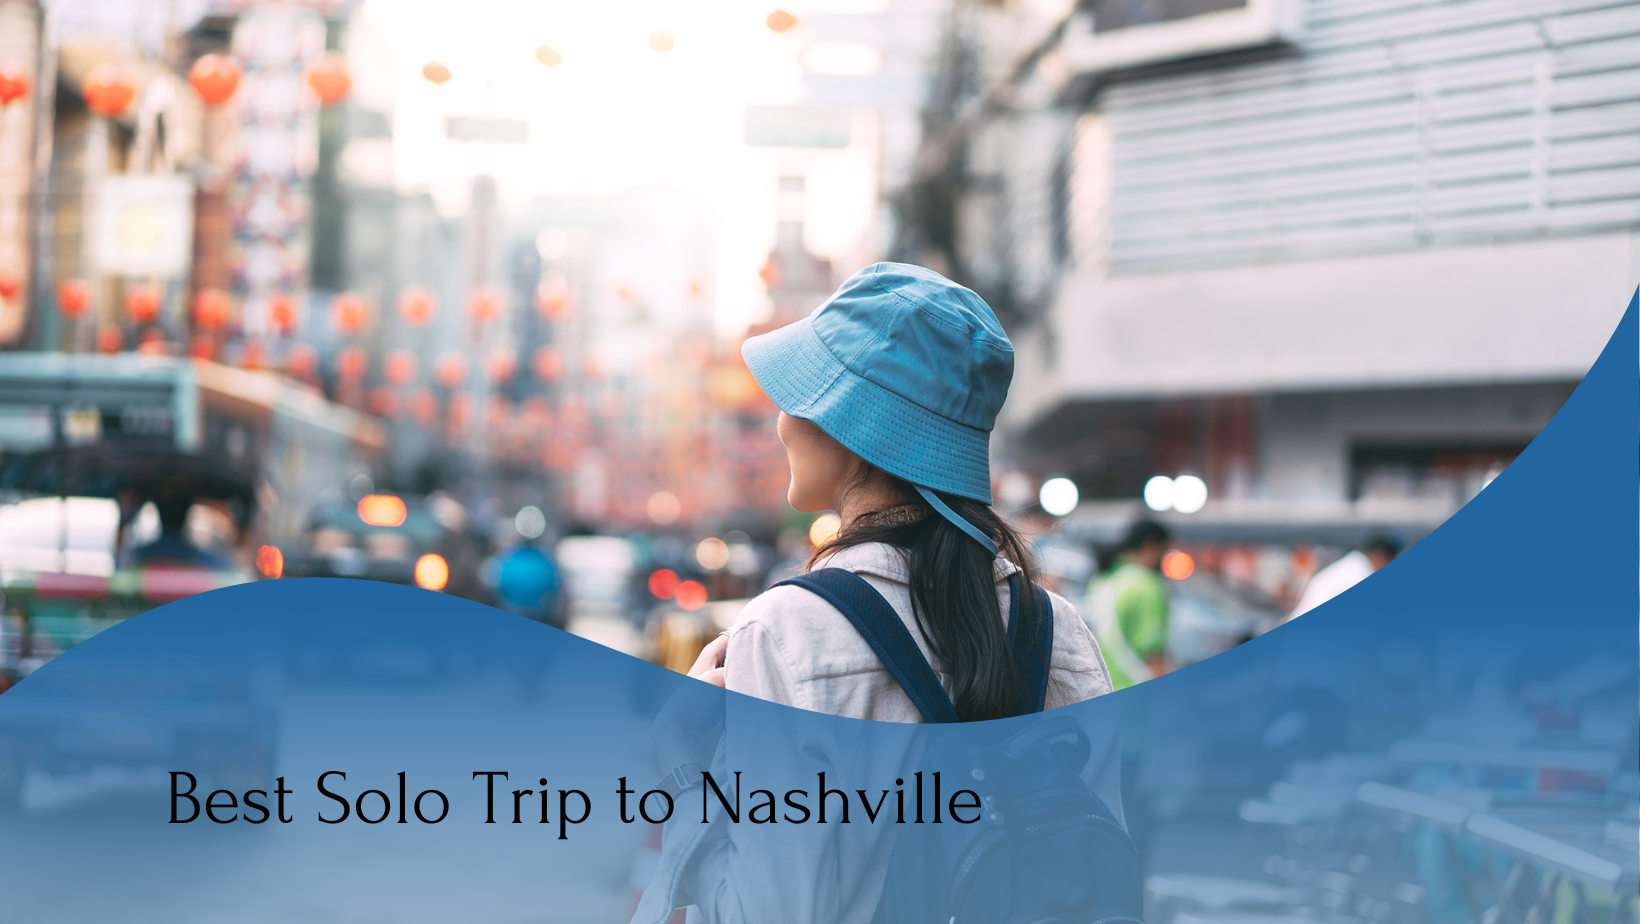 A person wearing a blue bucket hat and backpack stands on a lively city street. Text on the image reads, "Best Solo Trip to Nashville".